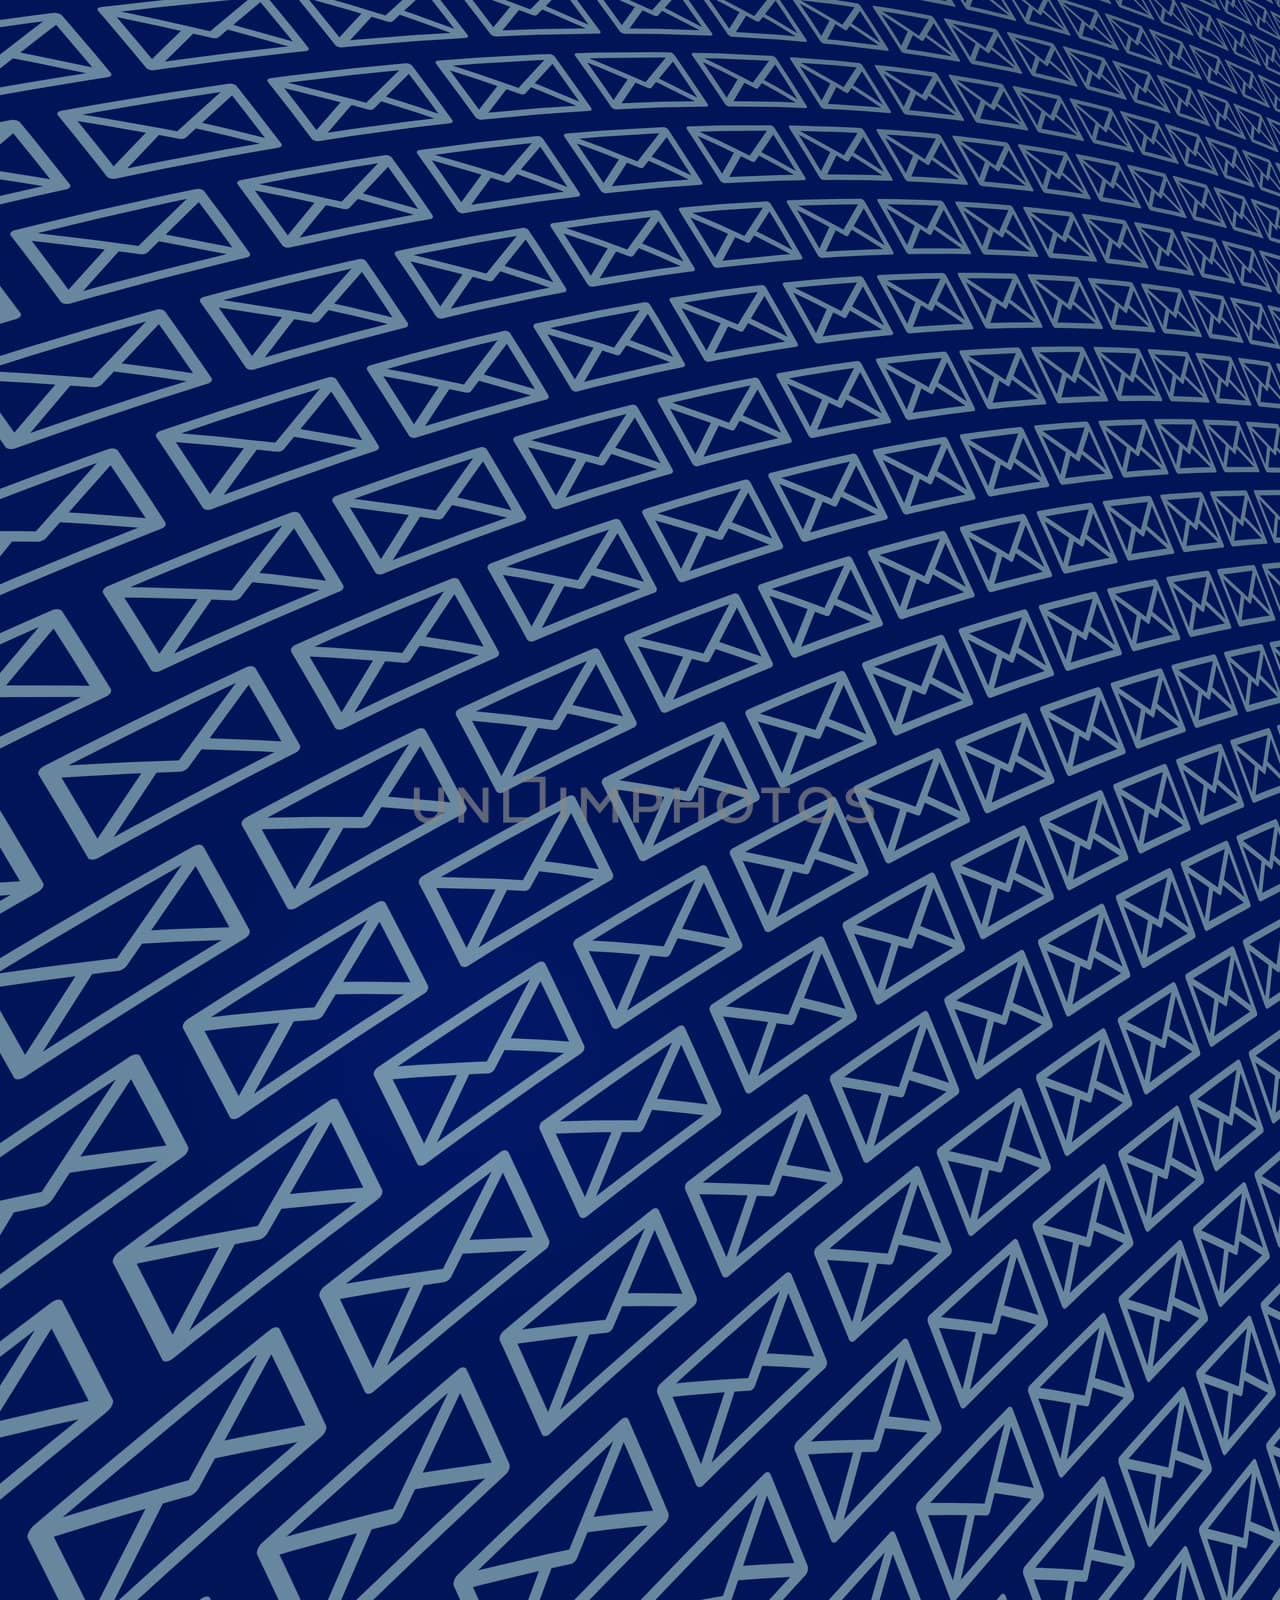 A field of Internet email icons